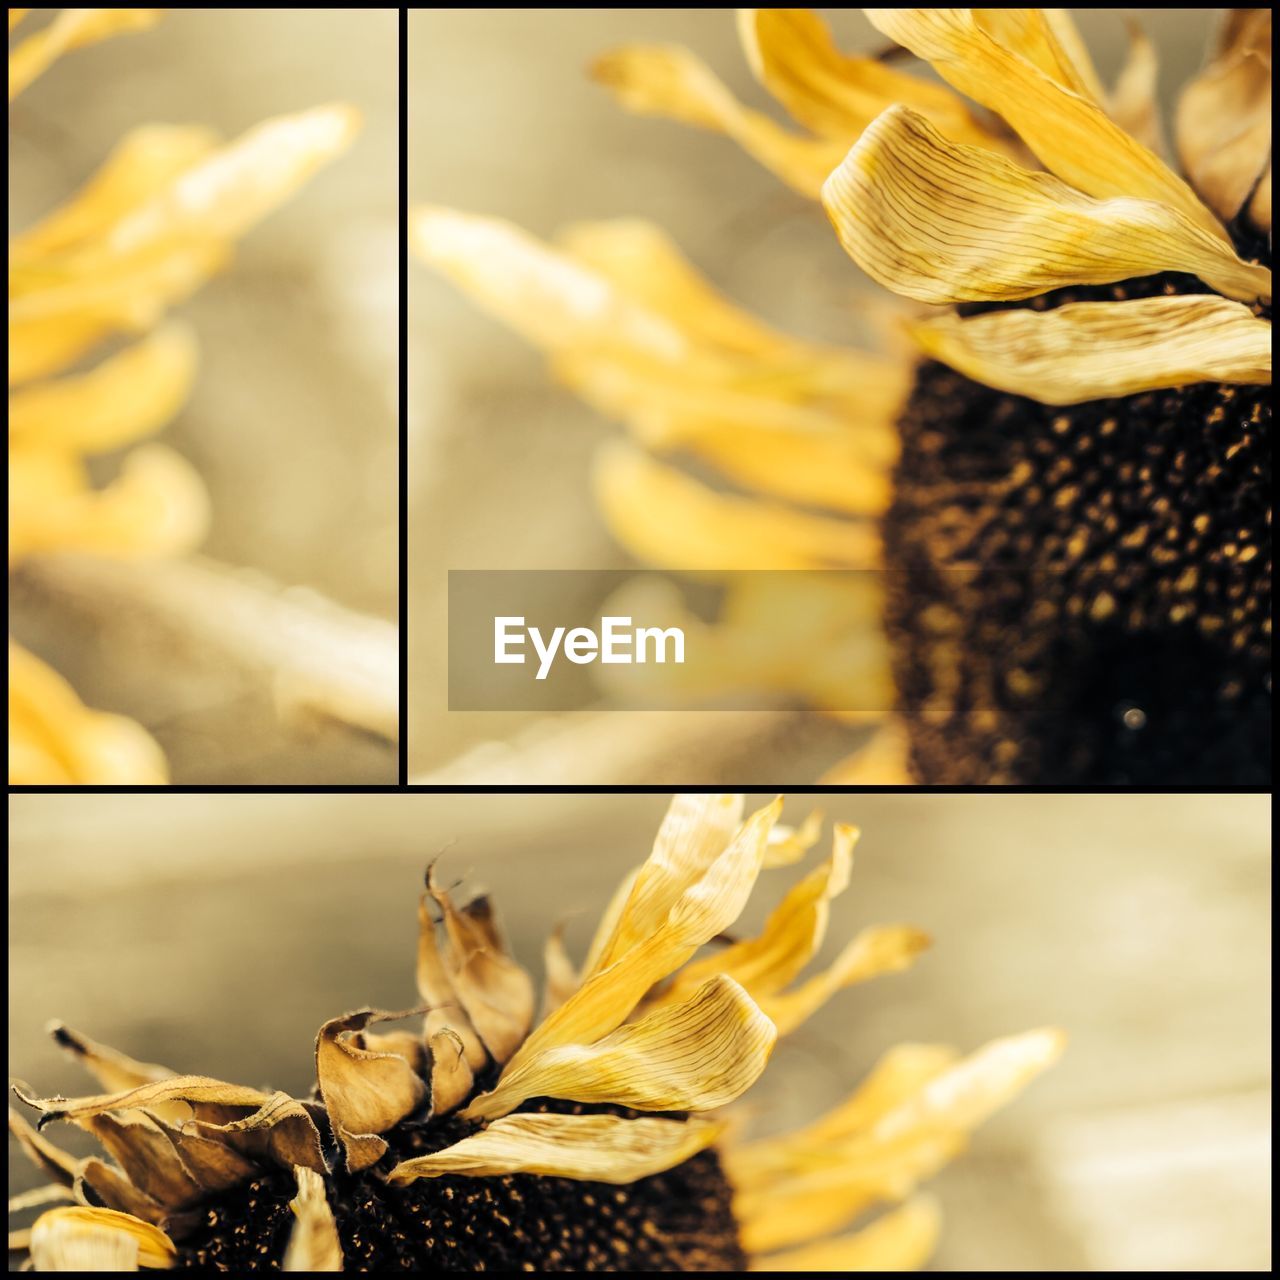 Collage of wilted sunflower